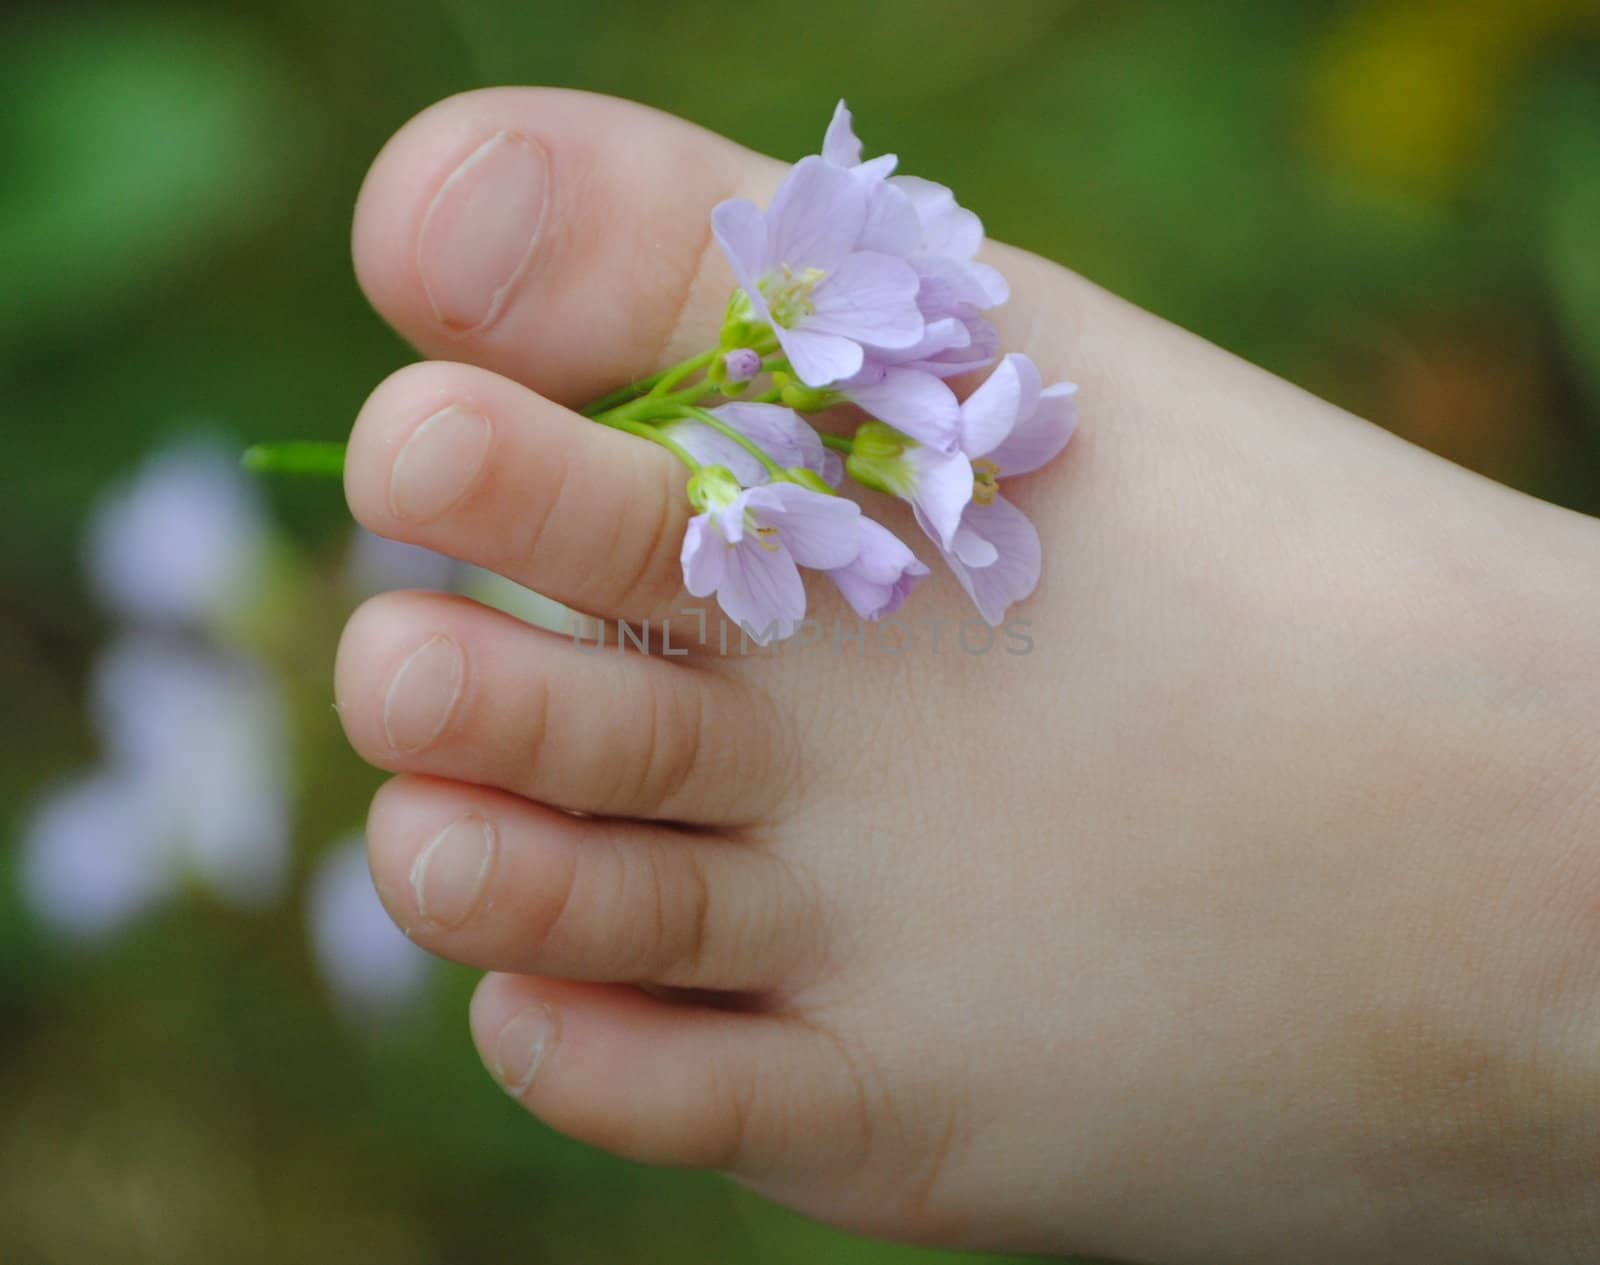 childs foot with a flower